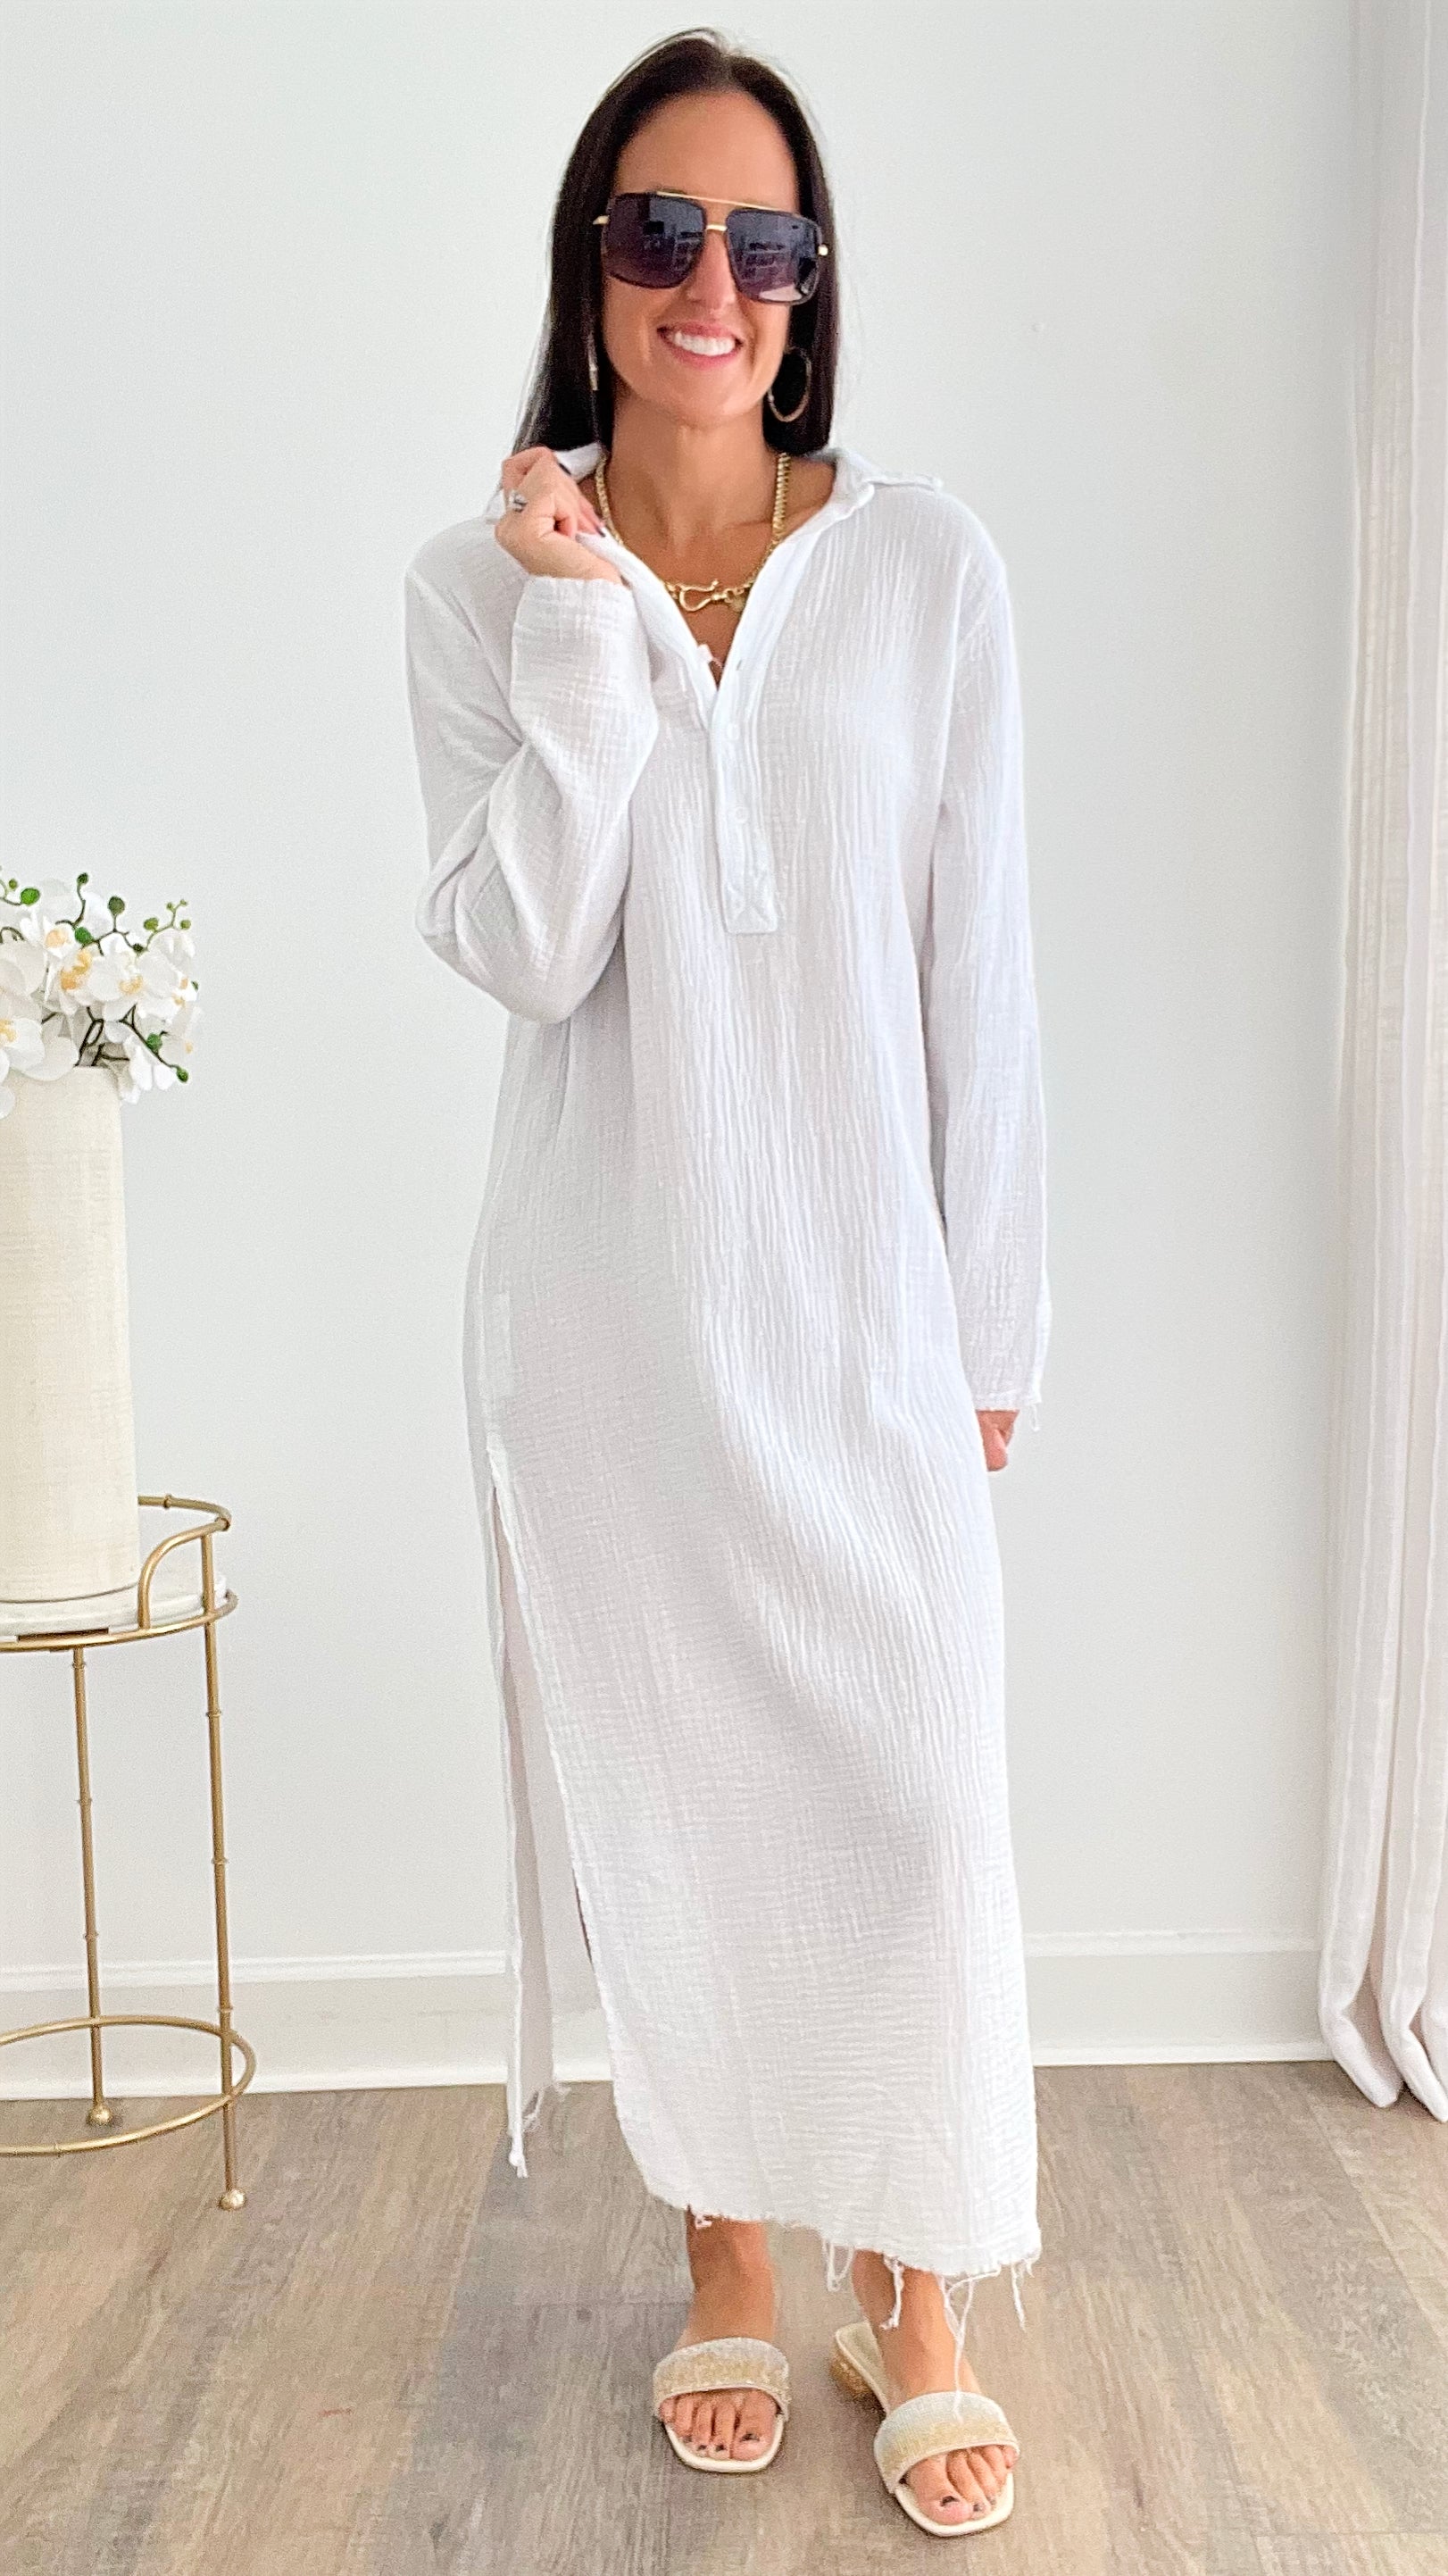 Italian Lightweight Vintage Tunic - White-200 dresses/jumpsuits/rompers-Venti6 Outlet-Coastal Bloom Boutique, find the trendiest versions of the popular styles and looks Located in Indialantic, FL